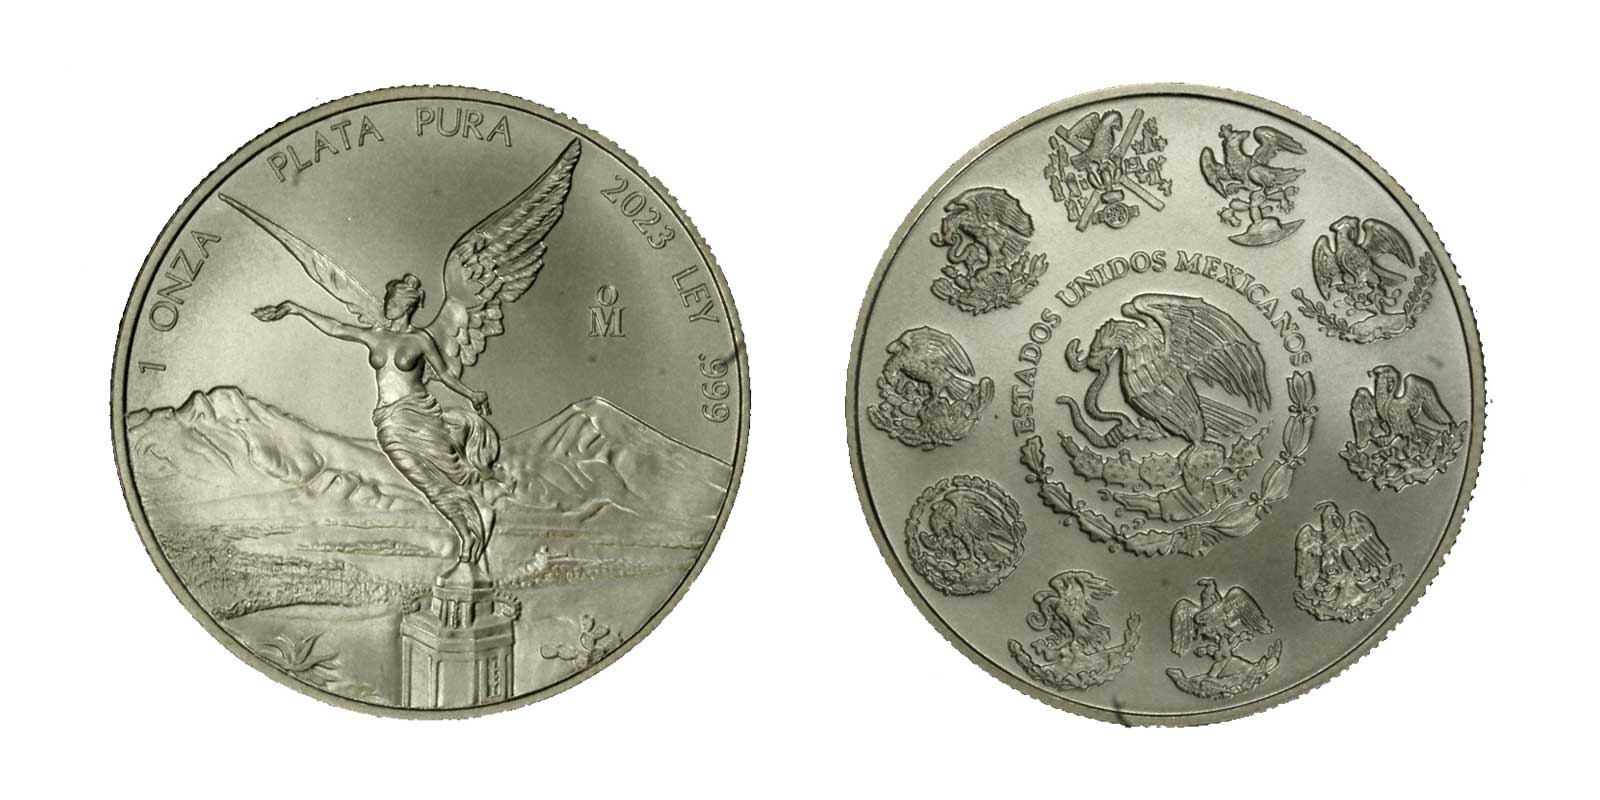 "Libertad" - Oncia gr. 31,103 in arg. 999/°°°